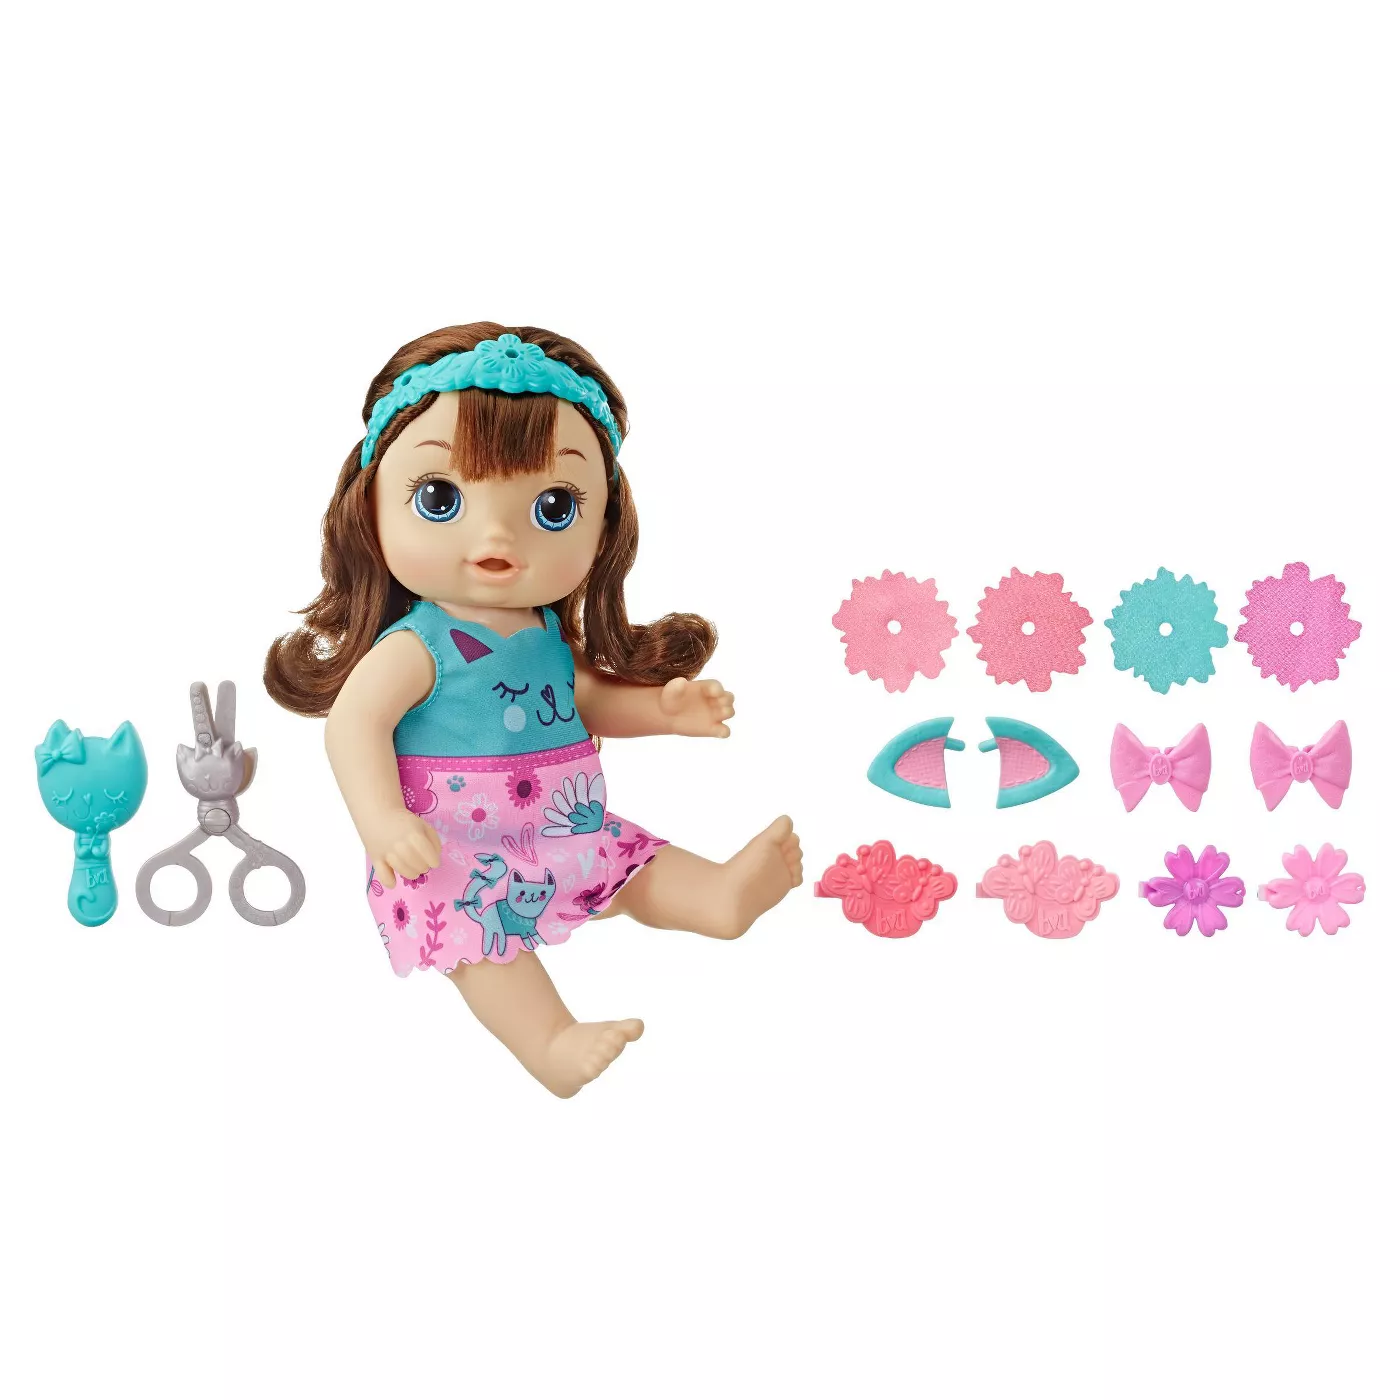 Baby Alive Snip 'n Style Baby - Teal Dress - image 1 of 7